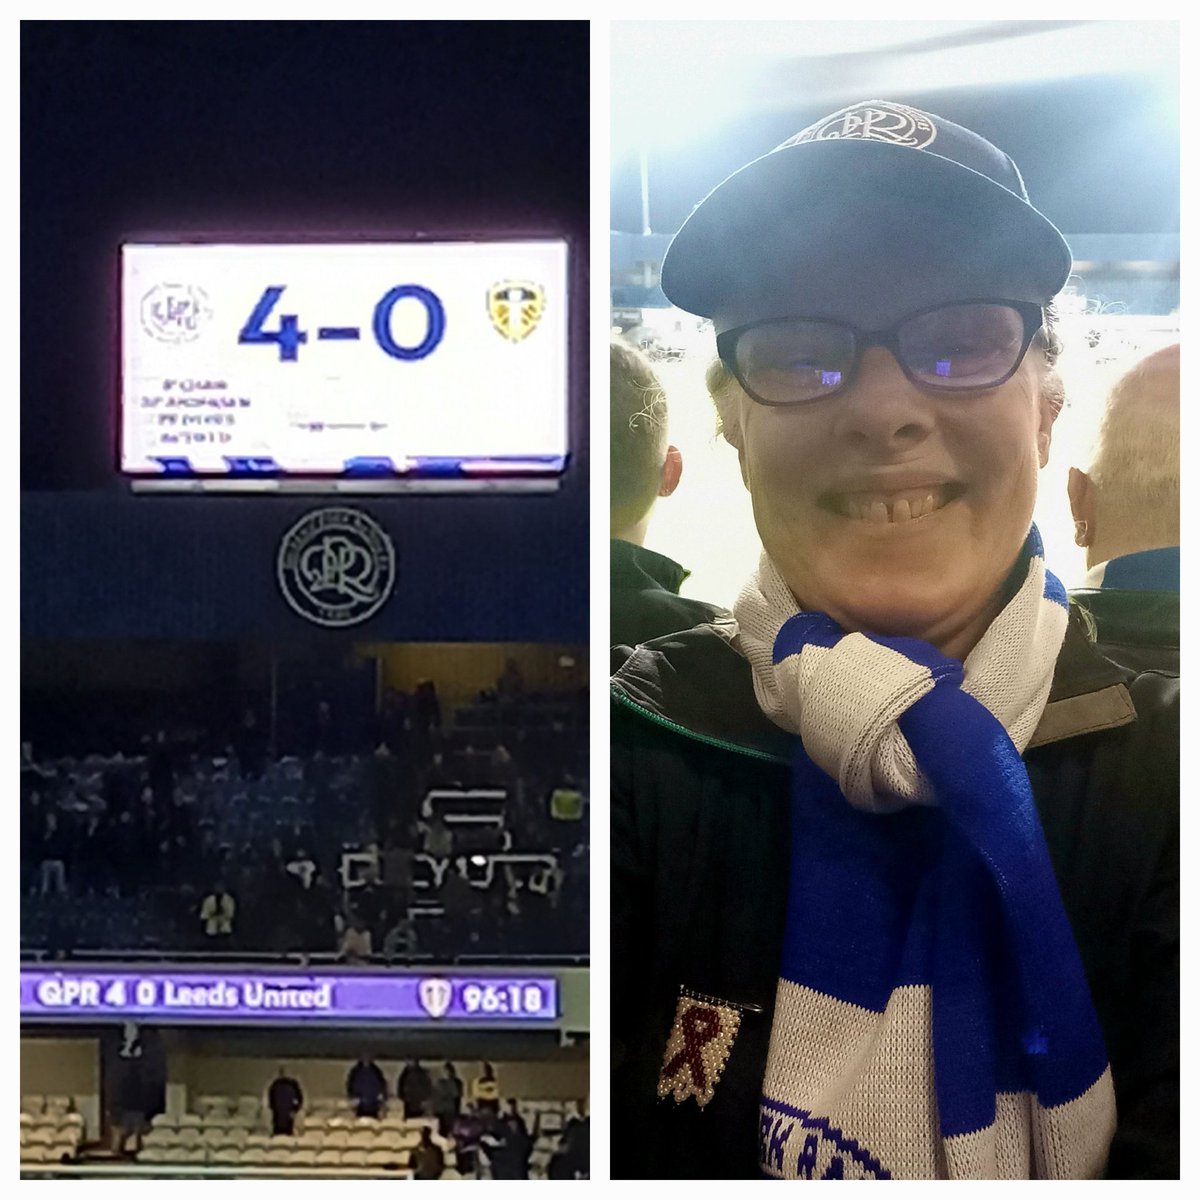 What a superb team performance from @QPR last night. Very happy to secure our place in the Championship for next season. Been supporting the Rs since my diagnosis when the club gave free tickets for our Positive Youth group to attend a game in early 1990s.